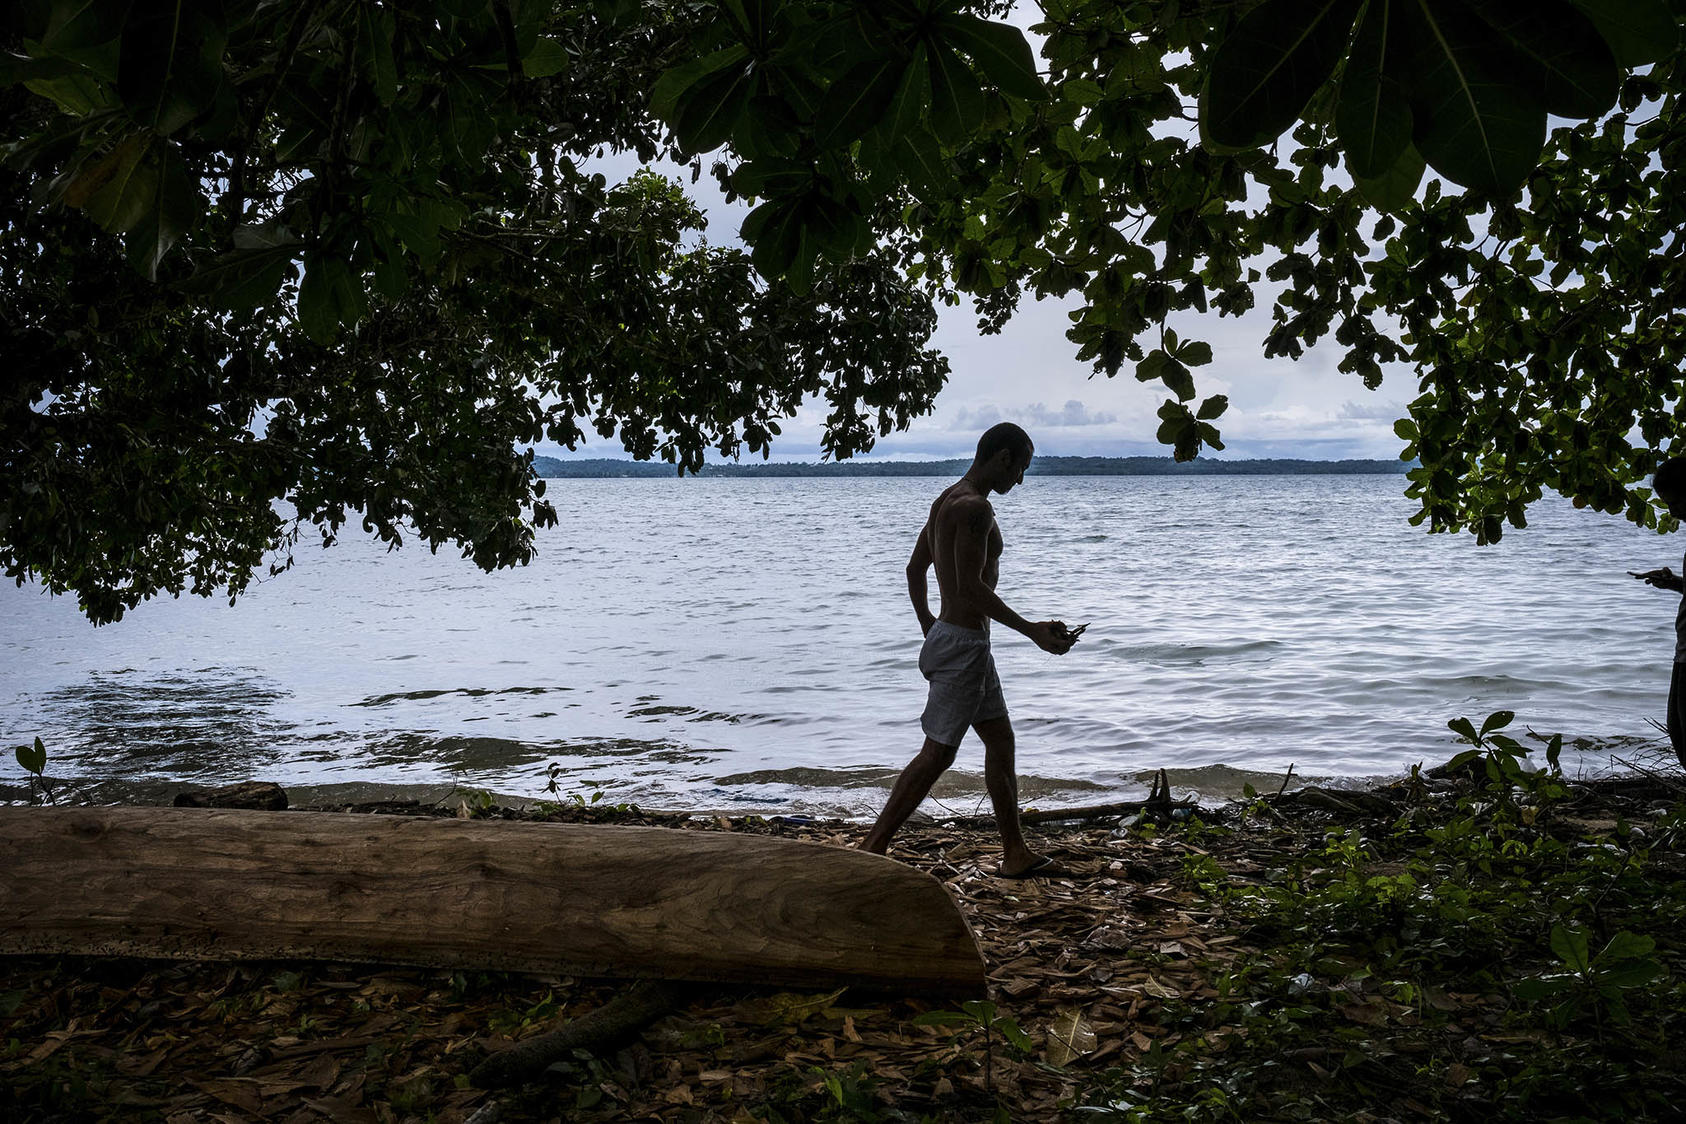 An asylum seeker on Manus Island, Papua New Guinea, Nov. 19, 2016. The situation of stranded refugees and migrants in processing centers on Manus Island brings additional stresses to local conditions. (Ashley Gilbertson/The New York Times)